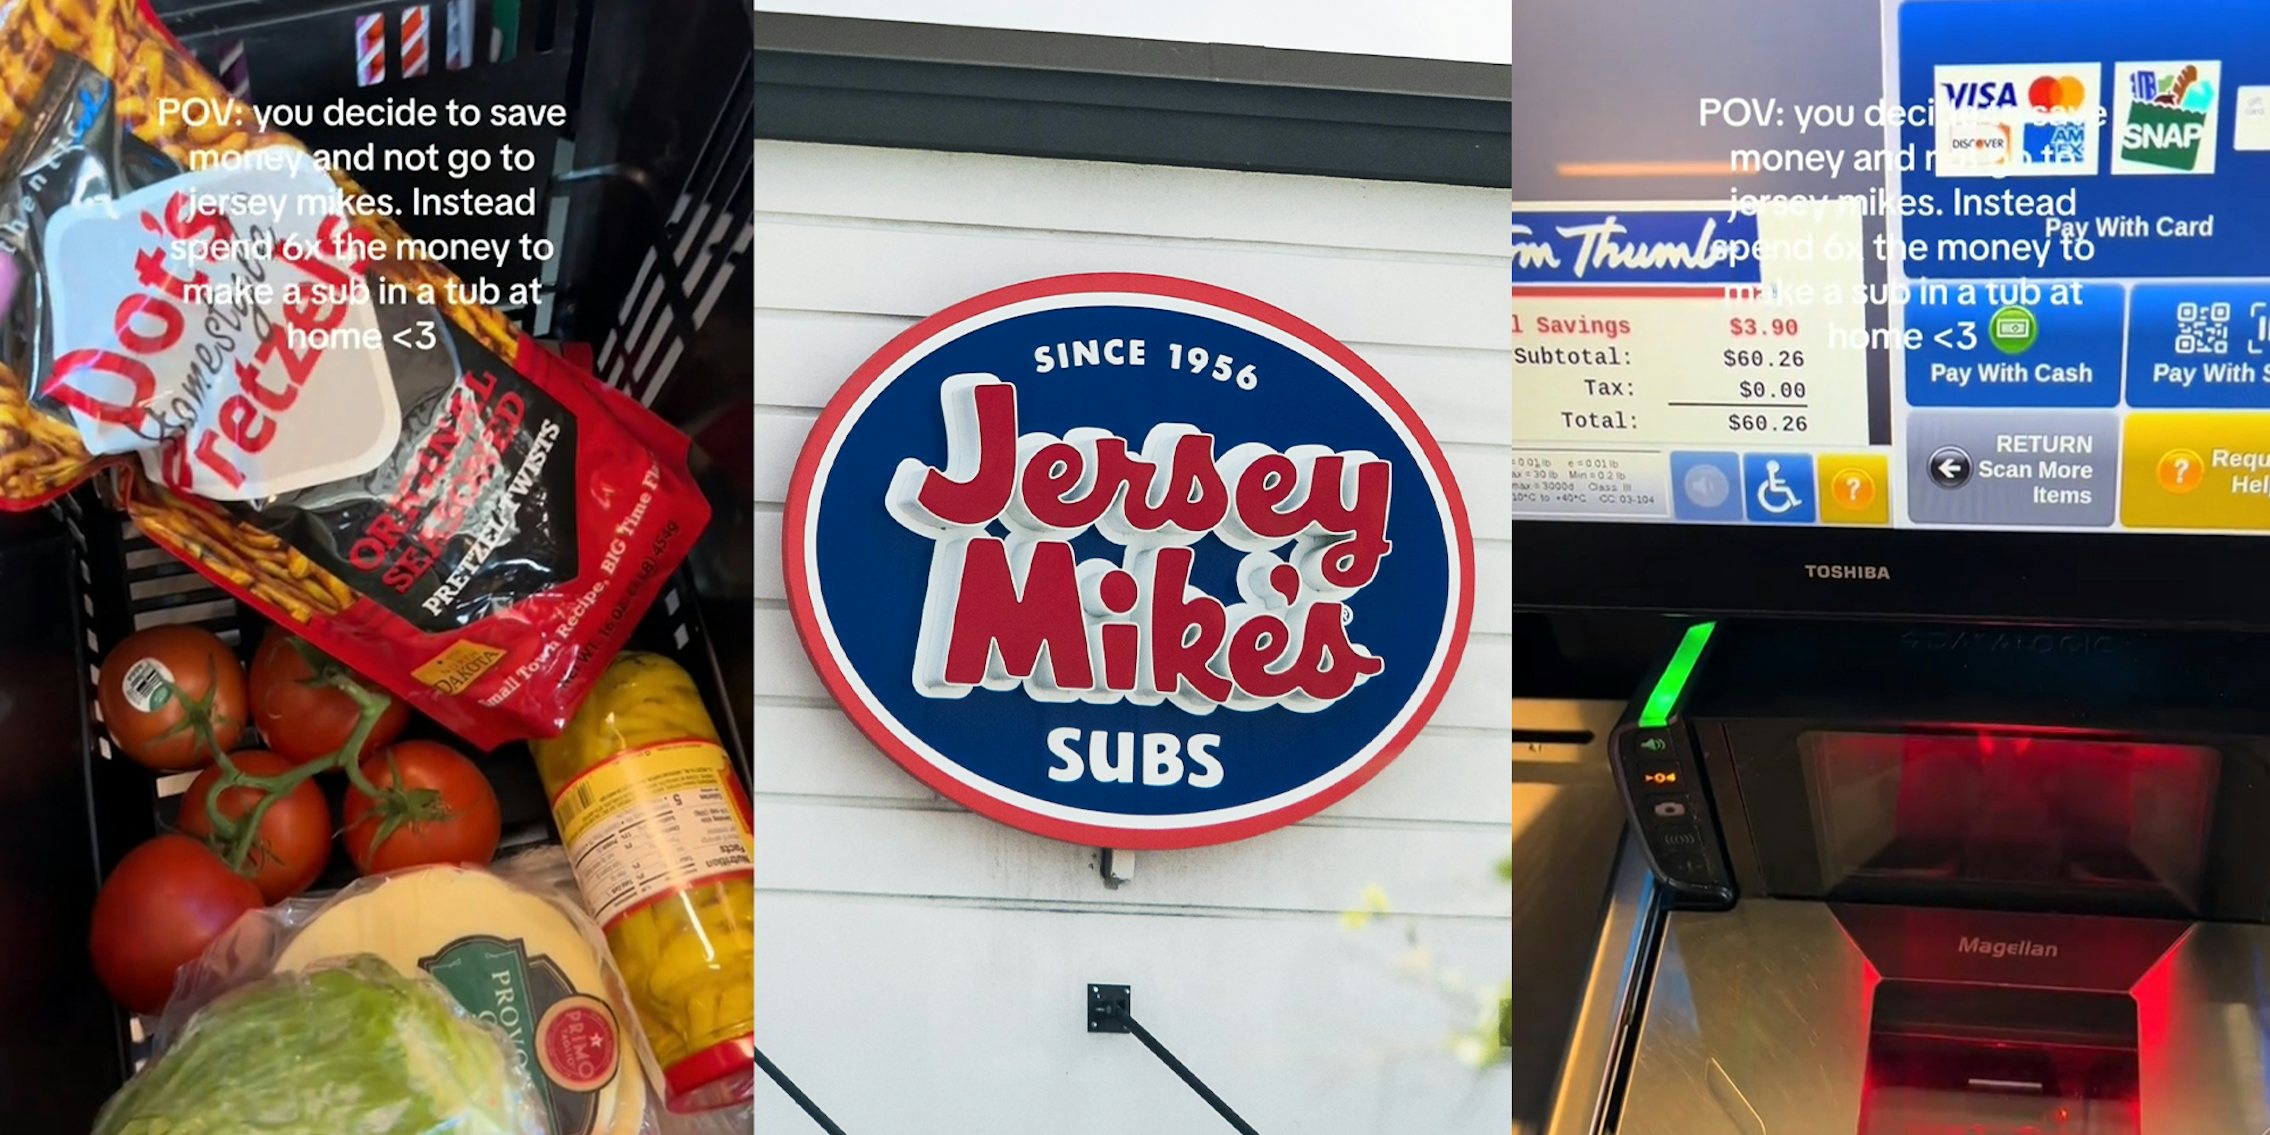 Jersey Mike’s customer tries to make 'Sub in a Tub' at home. It comes out to $60